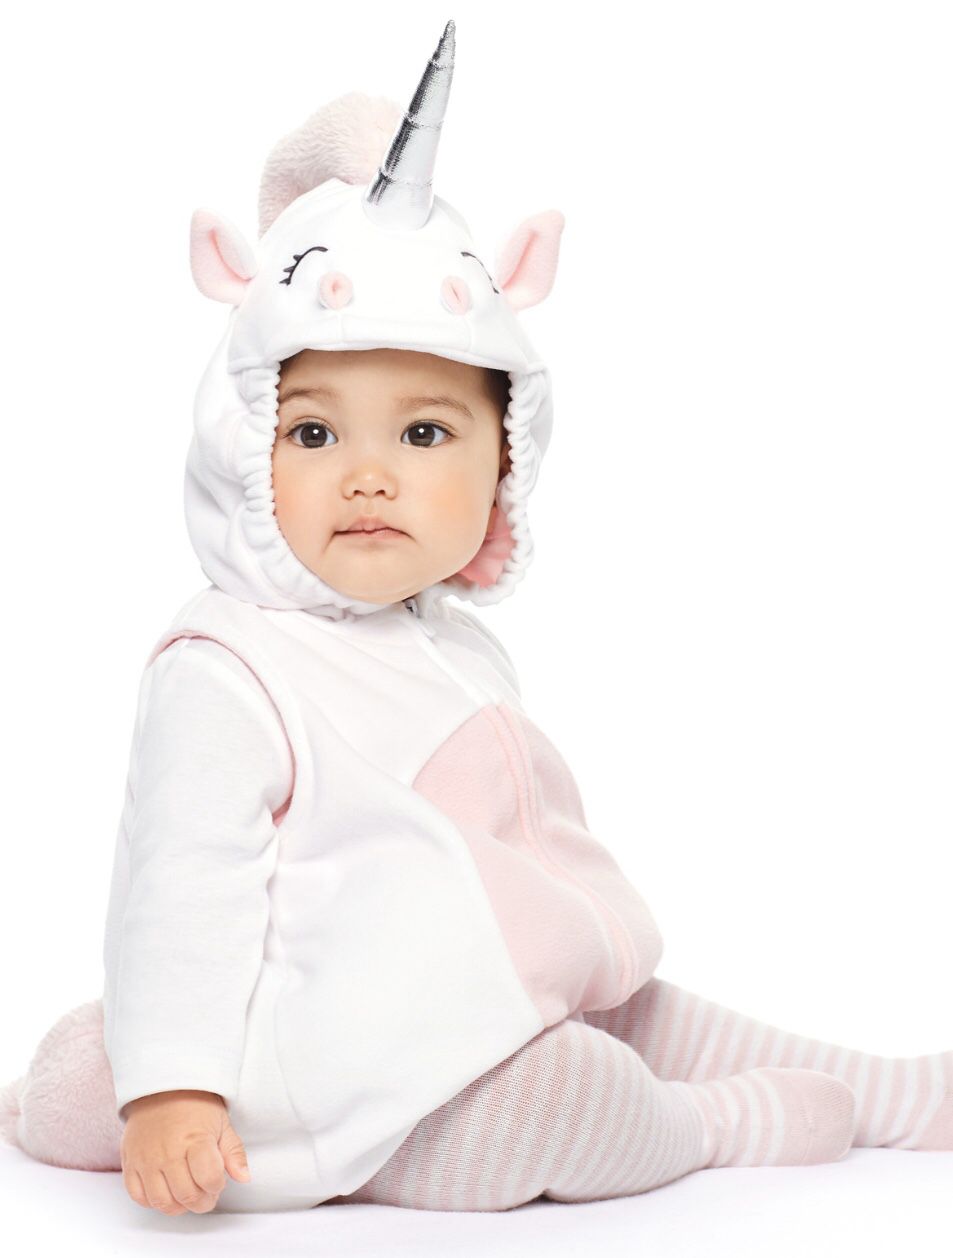 Brand NEW baby unicorn 3-6months costume. $25 3 piece outfit, white long sleeves top, pants, and soft vest. Super cute!